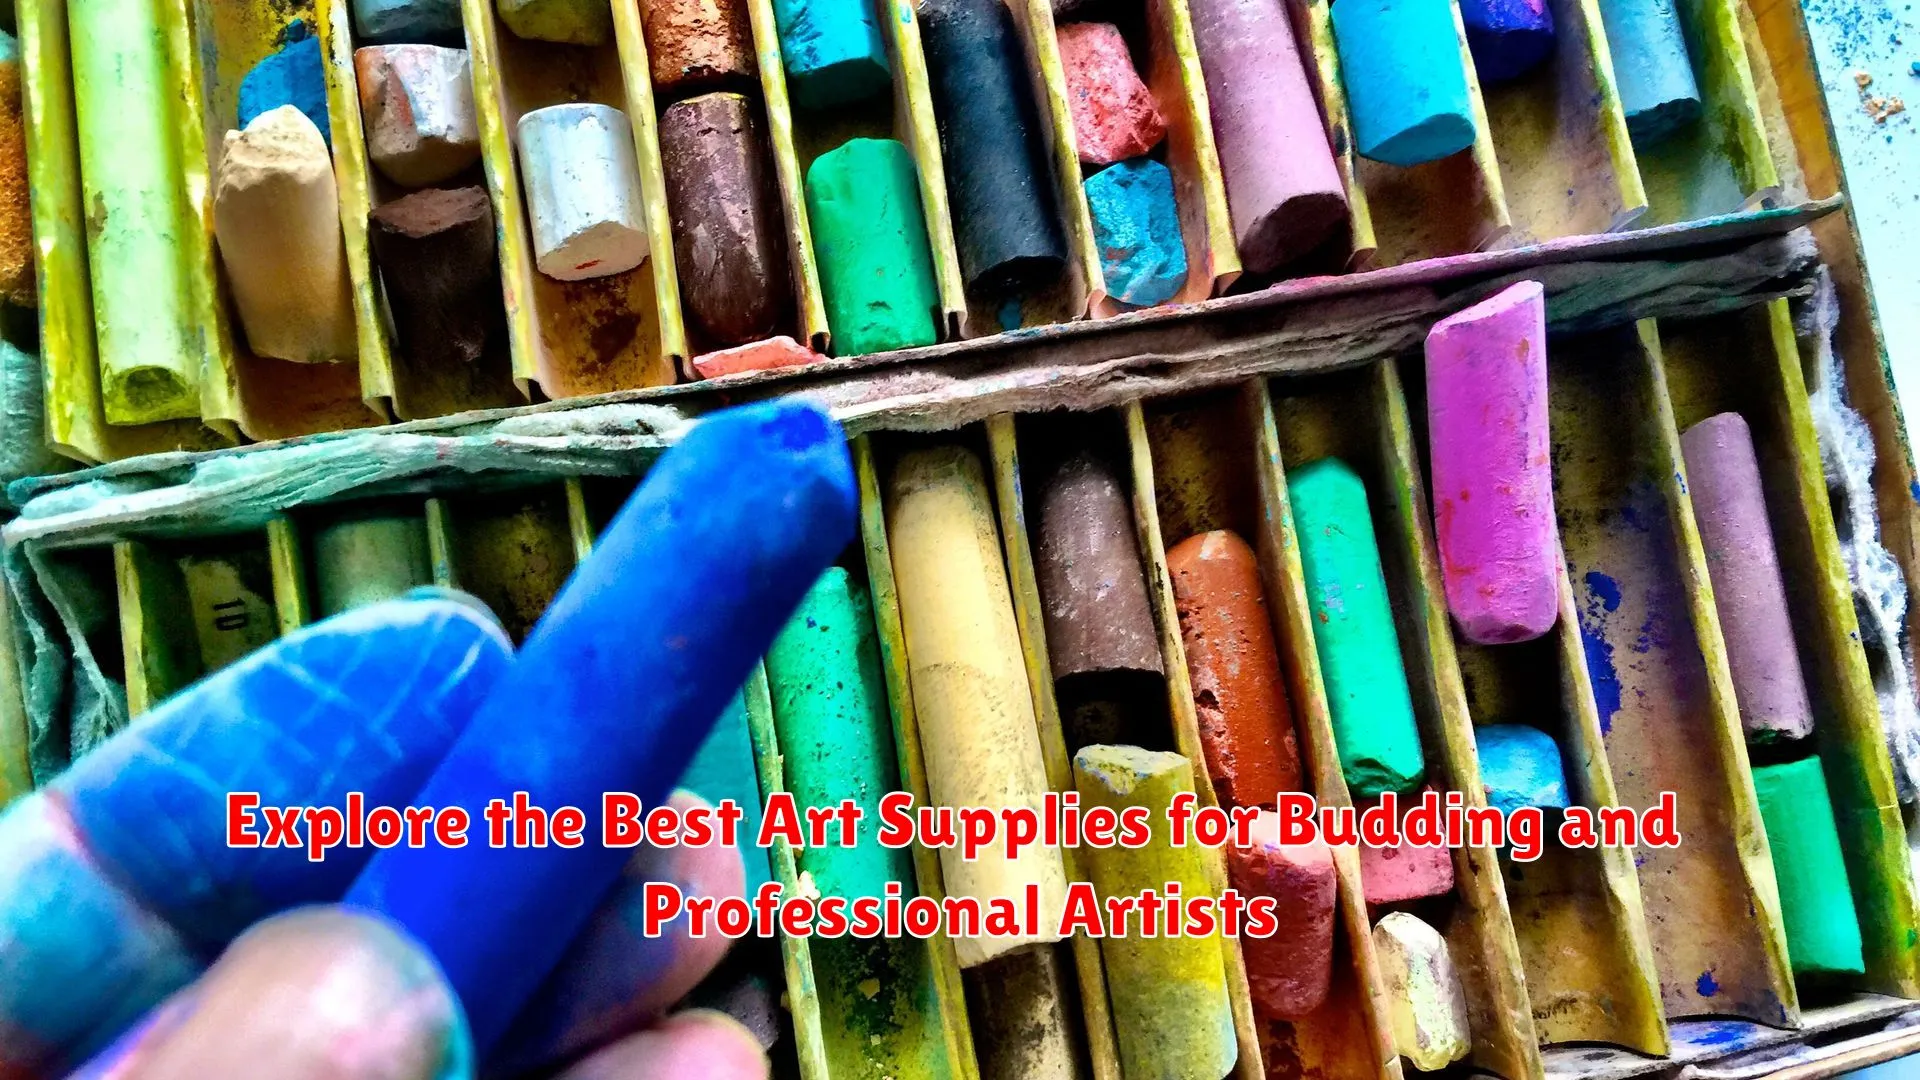 Explore the Best Art Supplies for Budding and Professional Artists